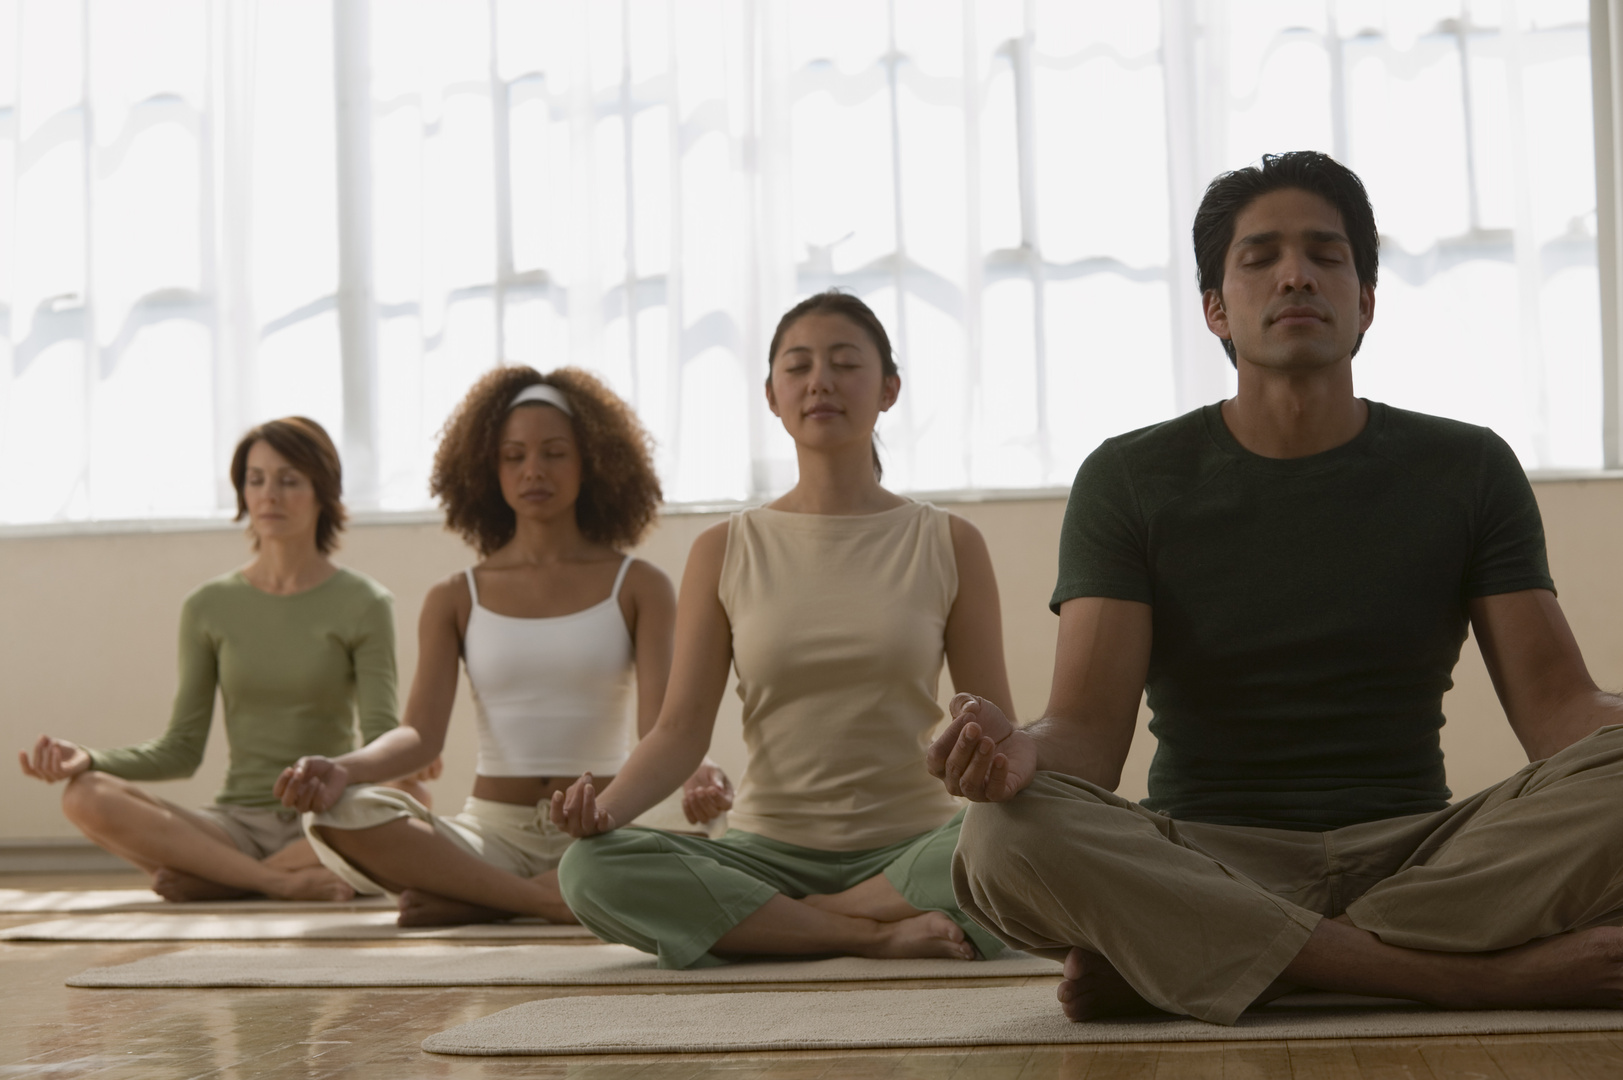 Group of people meditating